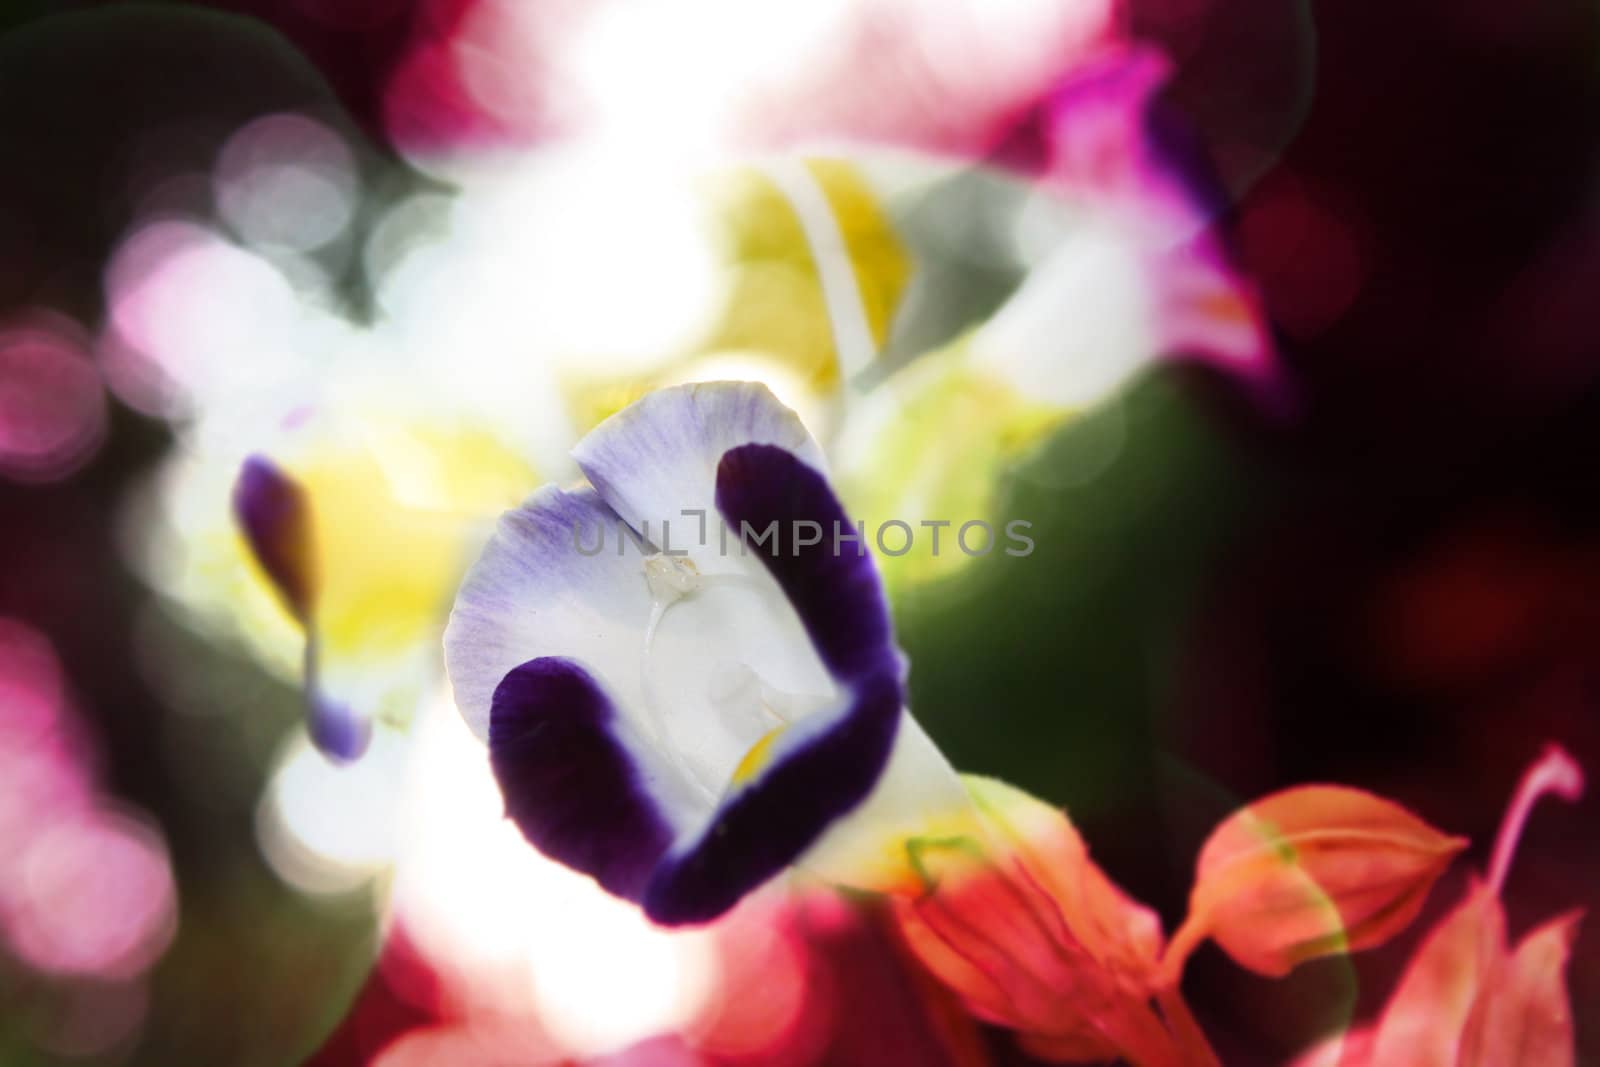 An abstract background of a blue flower, with colorful flowers out of focus in the backdrop.